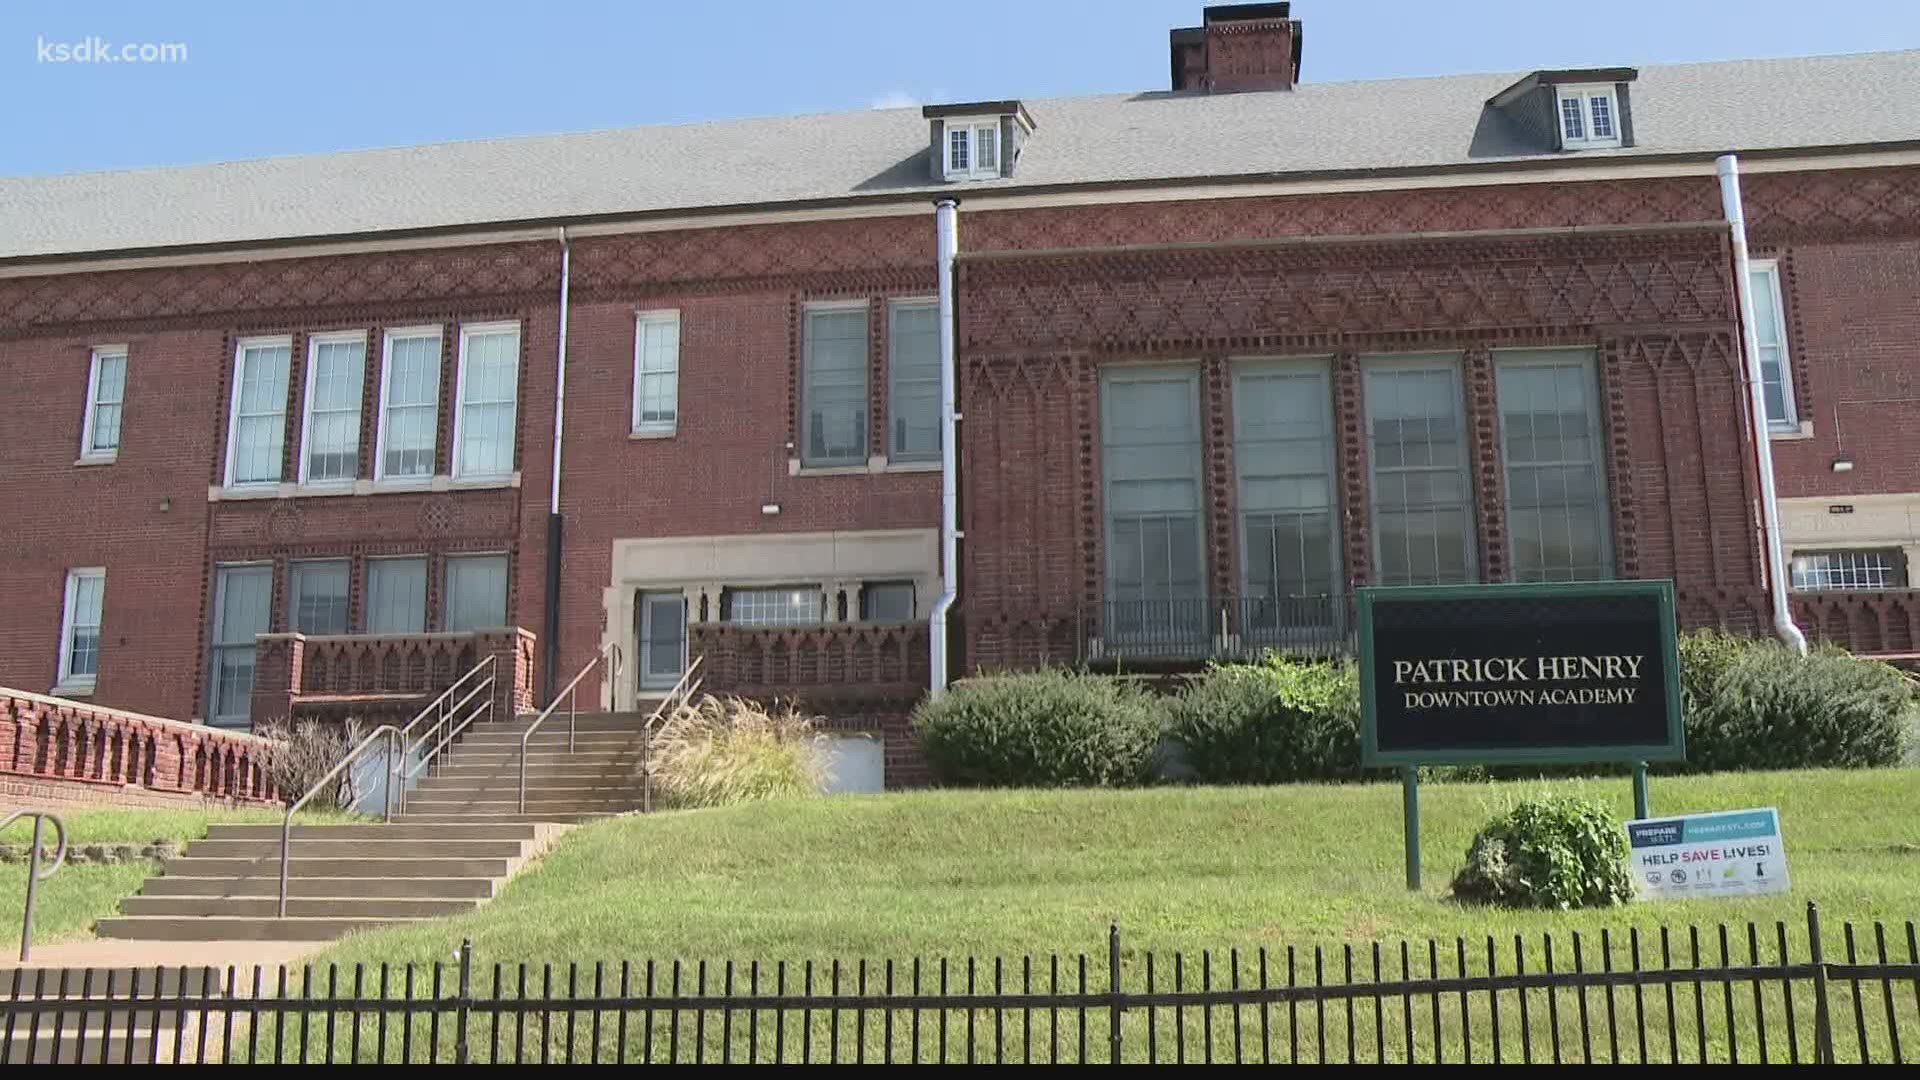 The youngest students at Saint Louis Public Schools are hopping on the bus and returning to the classroom Monday for the first time since last spring.